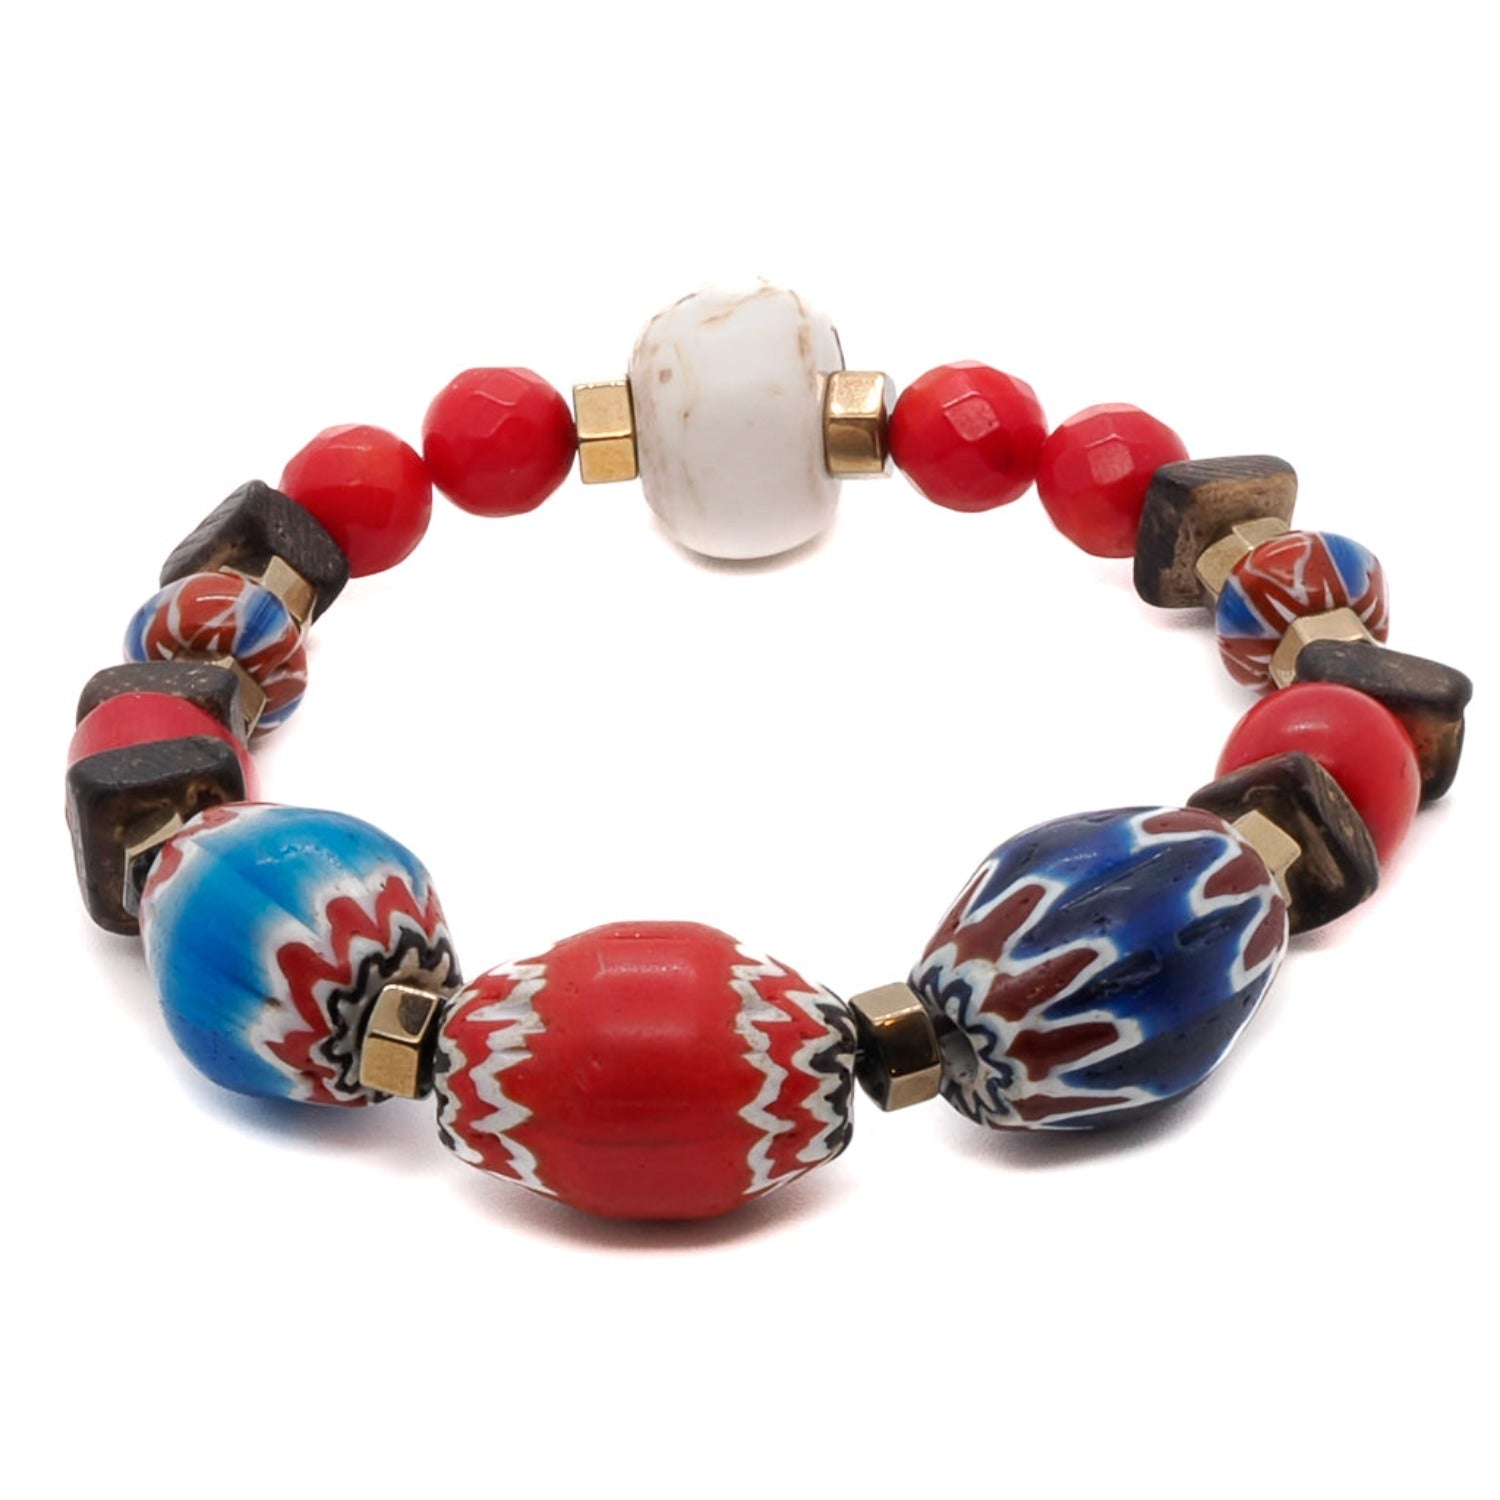 Celebrate your individuality with the Palena Bracelet, a one-of-a-kind piece of handmade jewelry adorned with African beads and red coral stone.